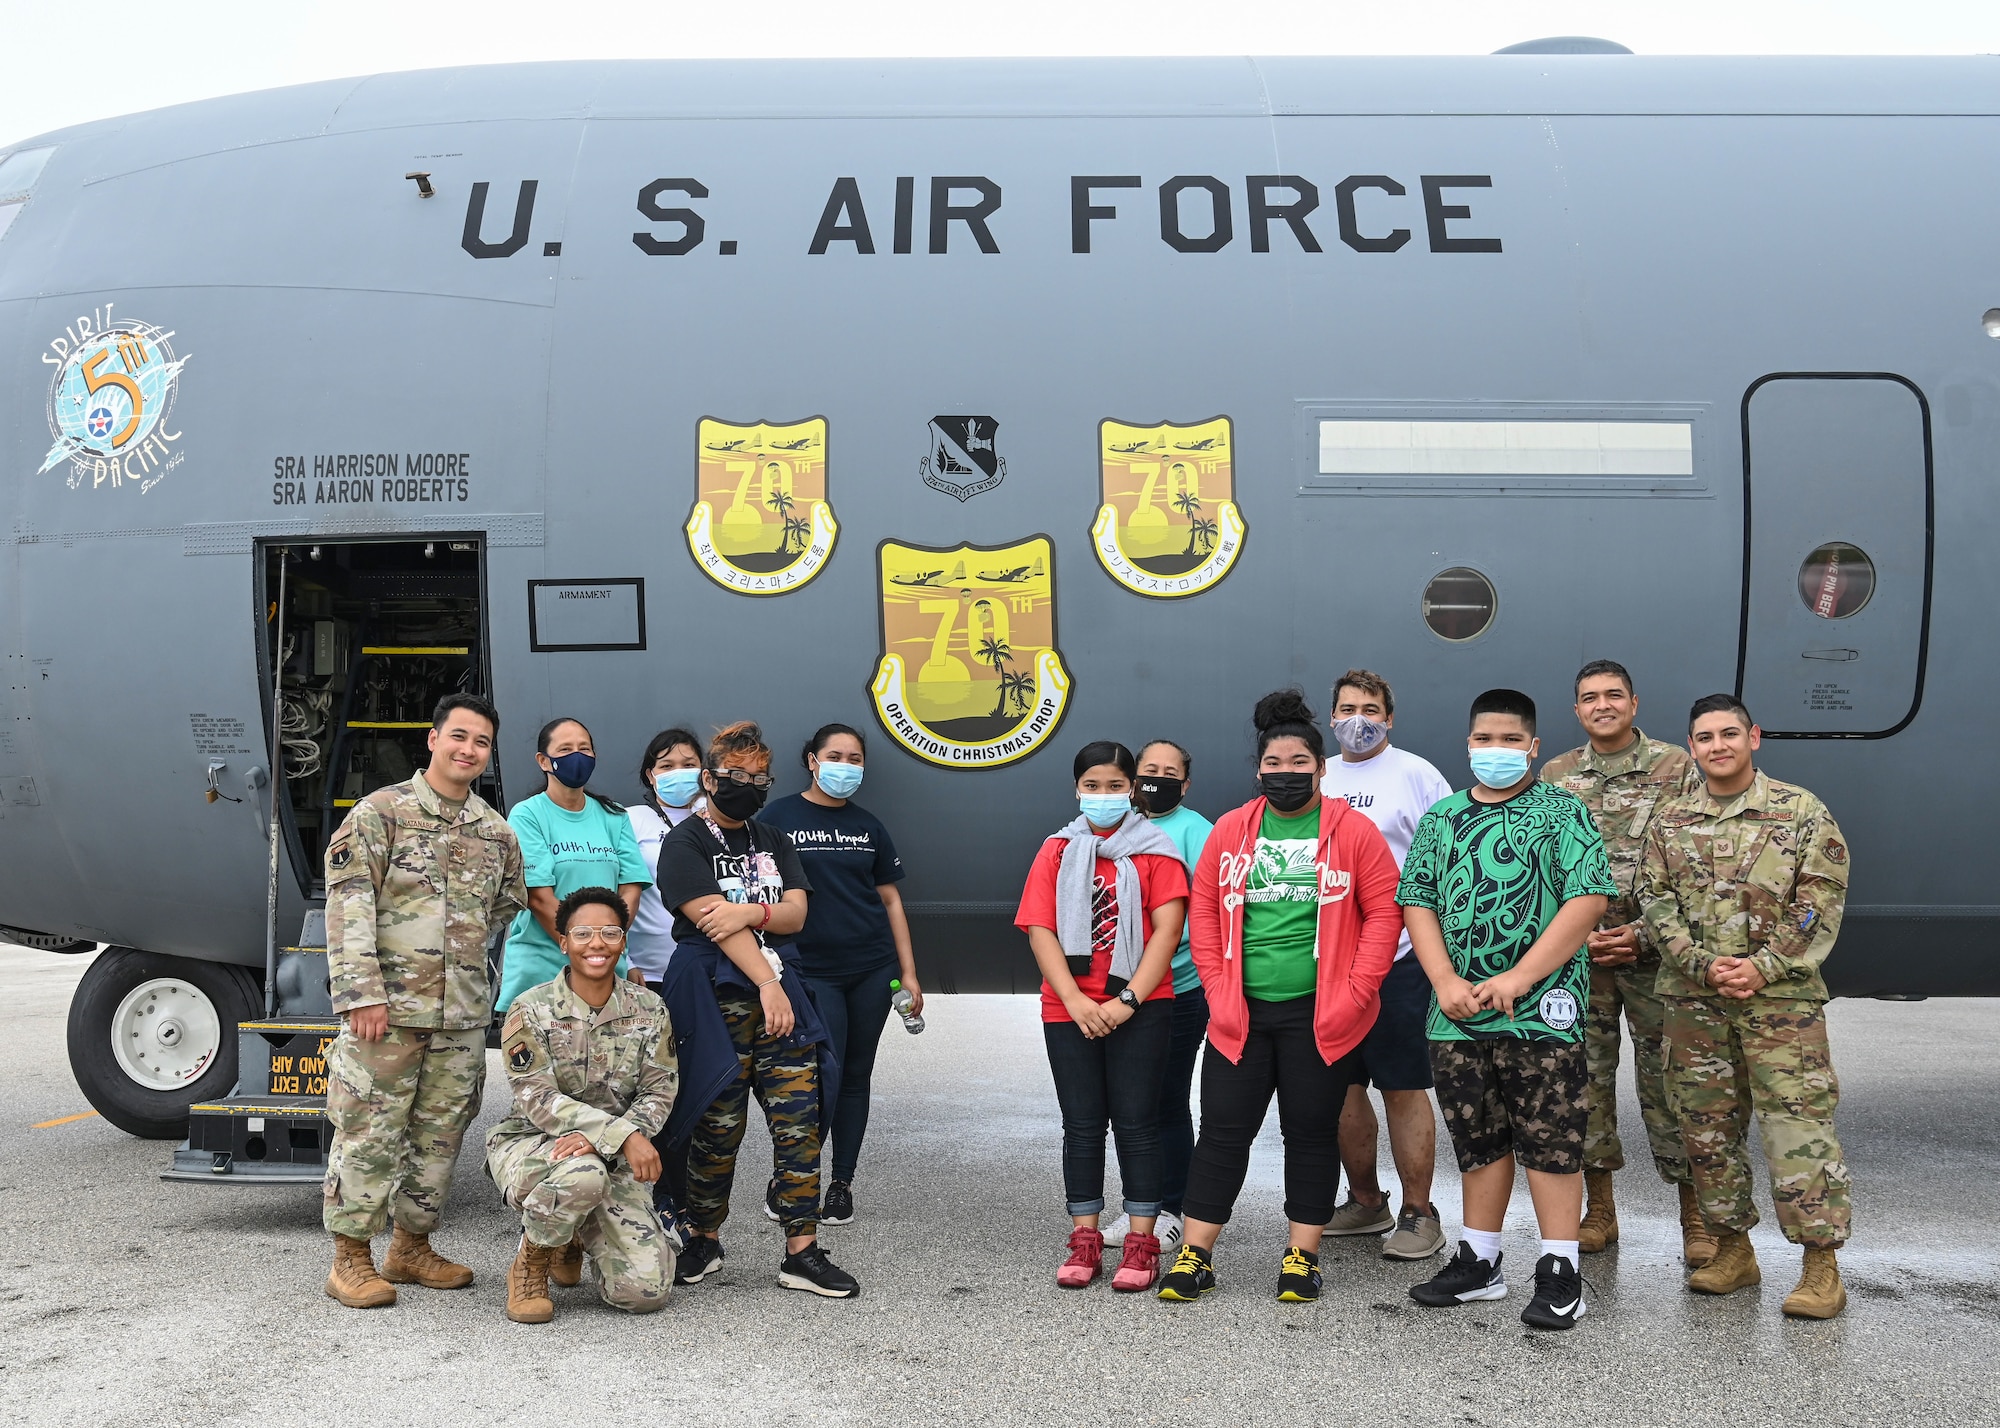 Members from the 36th Wing Staff Agencies hosted a tour for members with Mañelu, a Guam nonprofit organization that provides mentoring and empowering programs for youth and families, to teach them about Operation Christmas Drop.